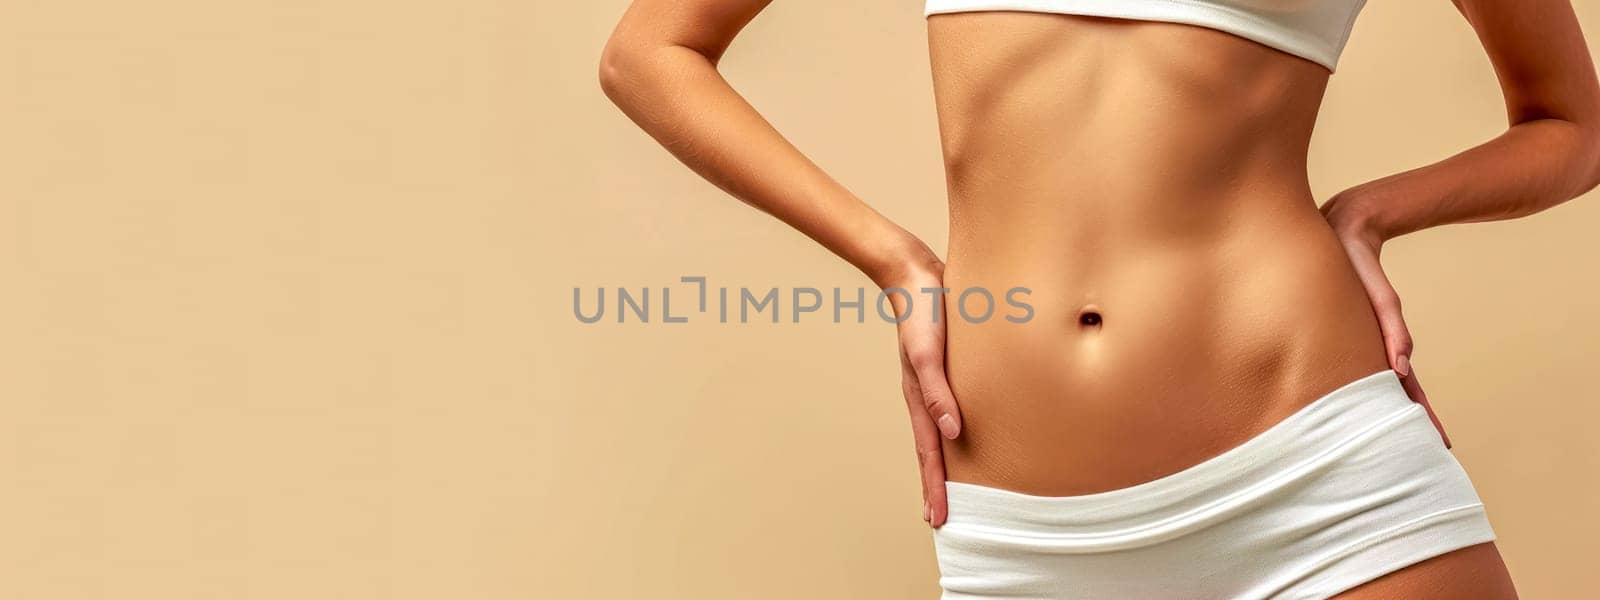 woman's toned midsection against a beige background, wearing a white undergarment or sportswear, exemplifying fitness, health, and body care, banner with copy space